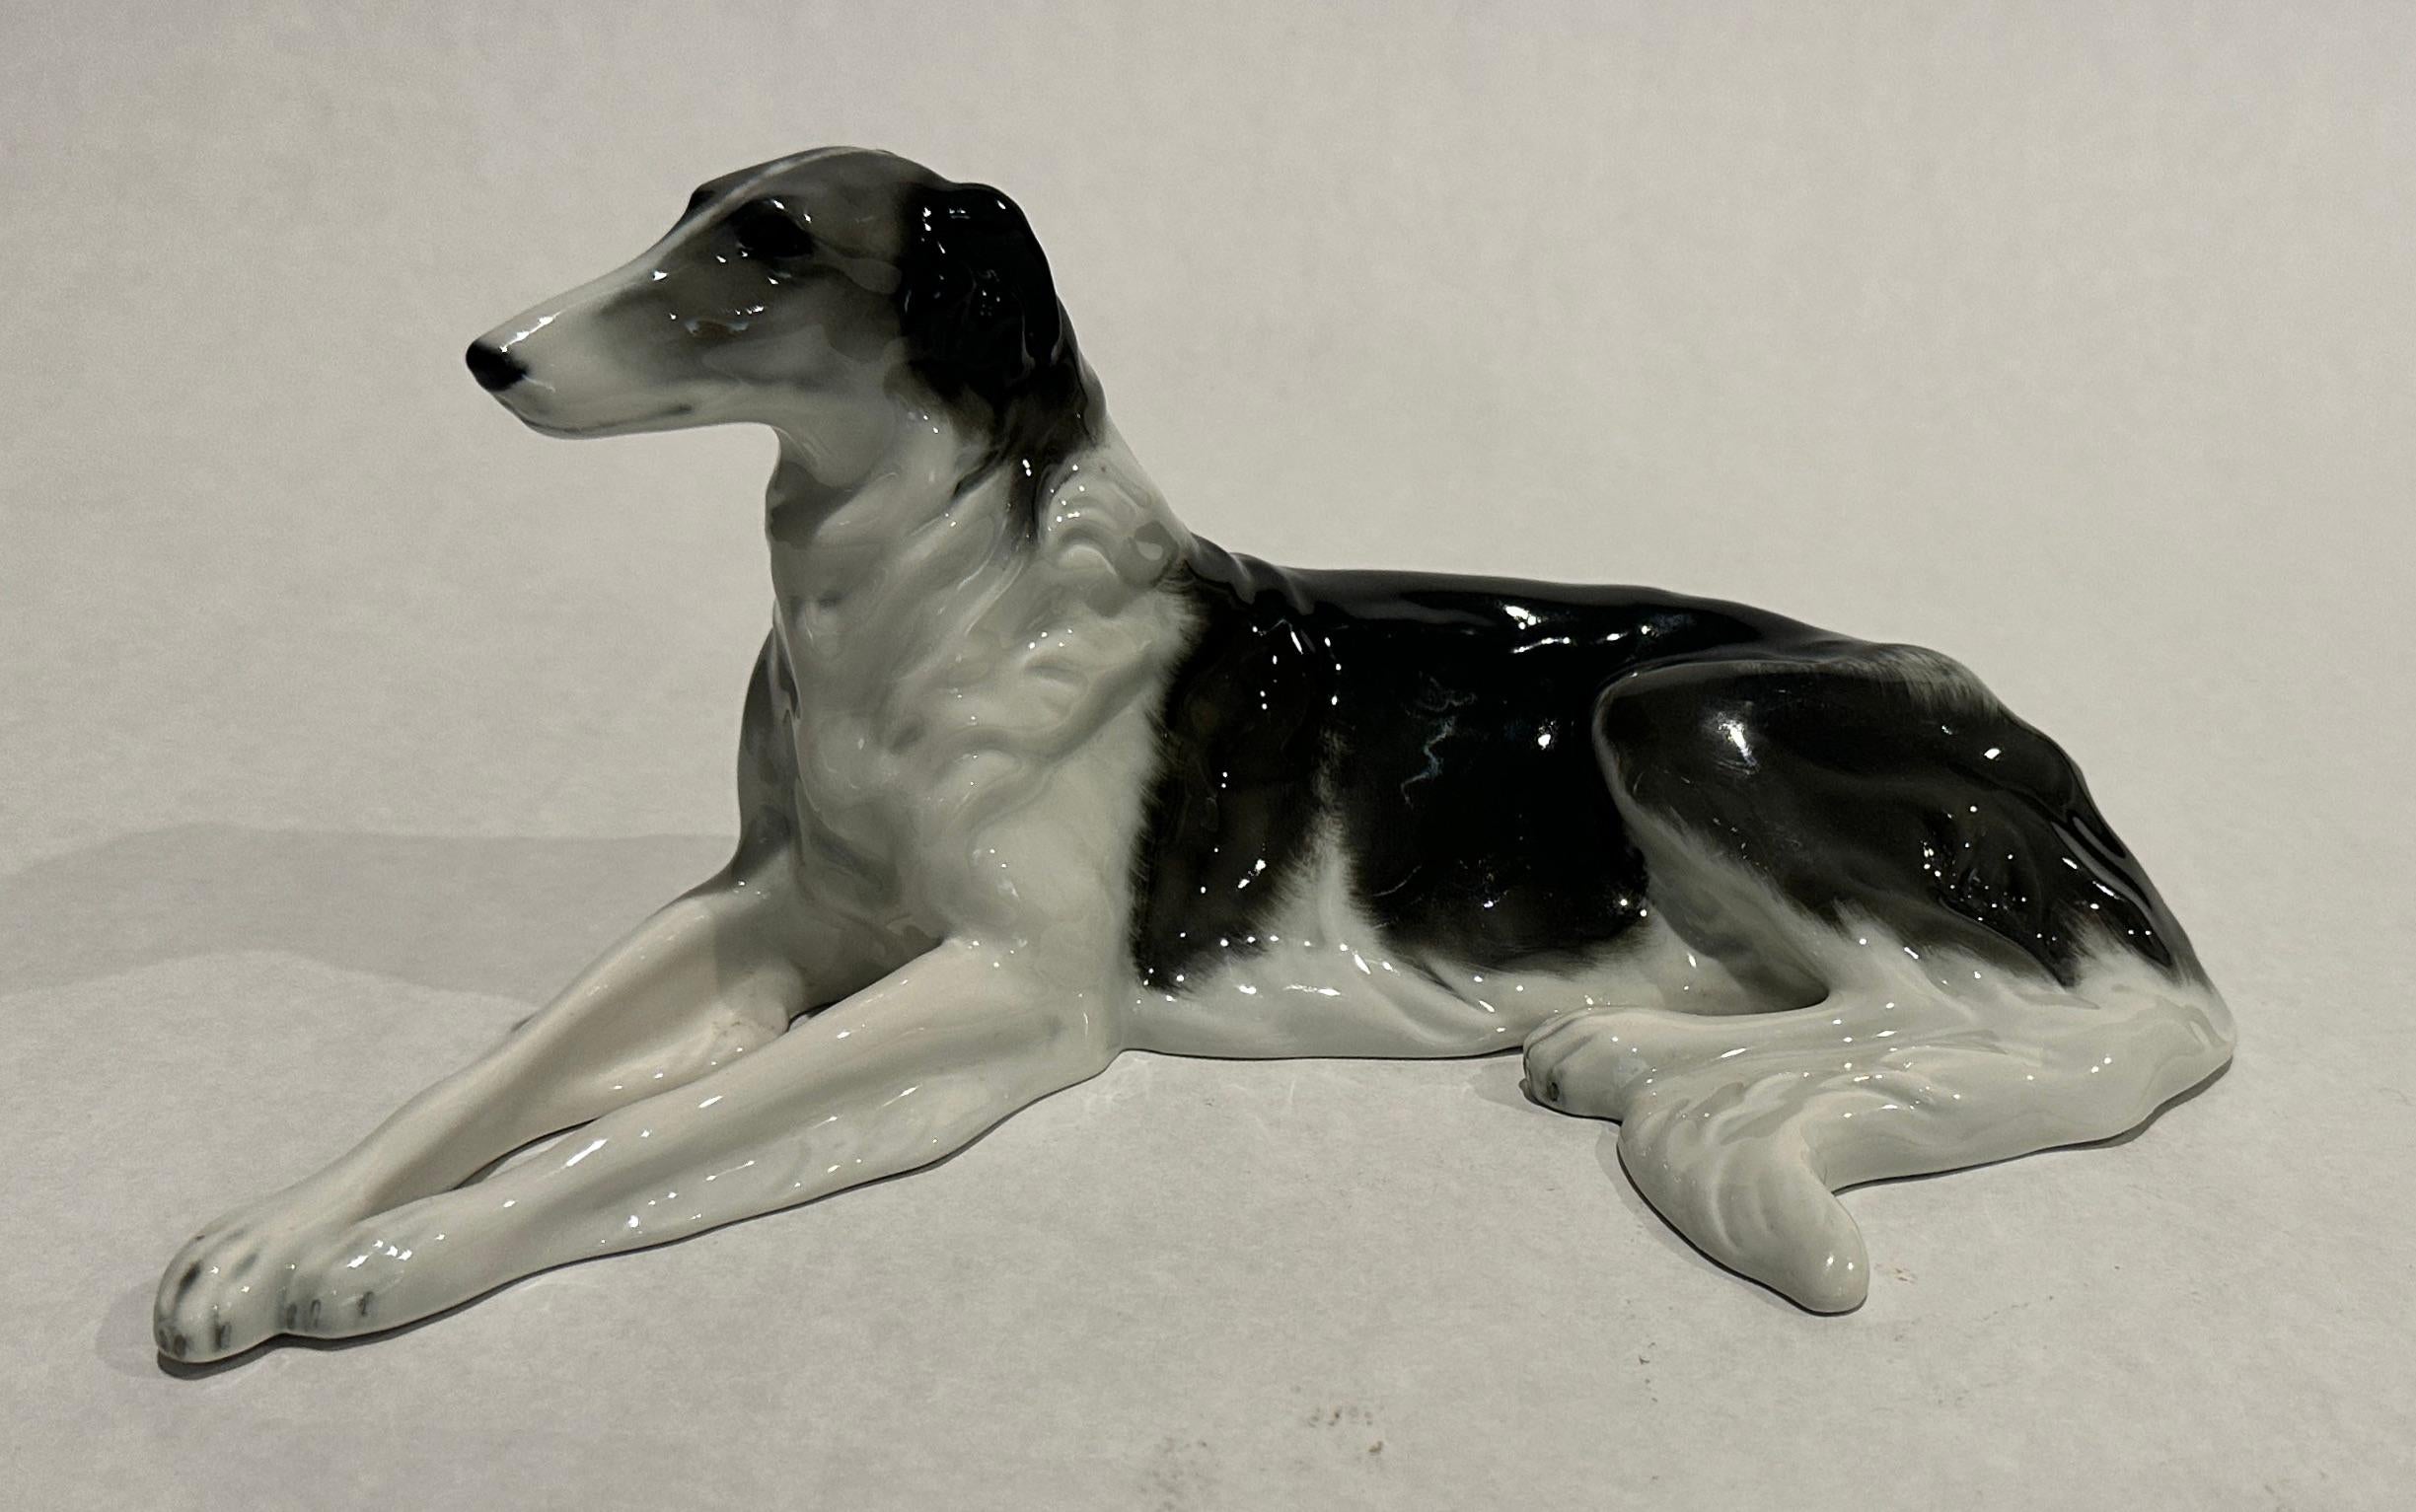 Porcelain dog sculpture, Borzoi/ Russian Wolfhound, depicting a Borzoi lying on the floor with outstretched forelegs, naturalistic polychrome painted , signed on the back above the standing edge. This vintage detailed Borzoi figurine is made by the